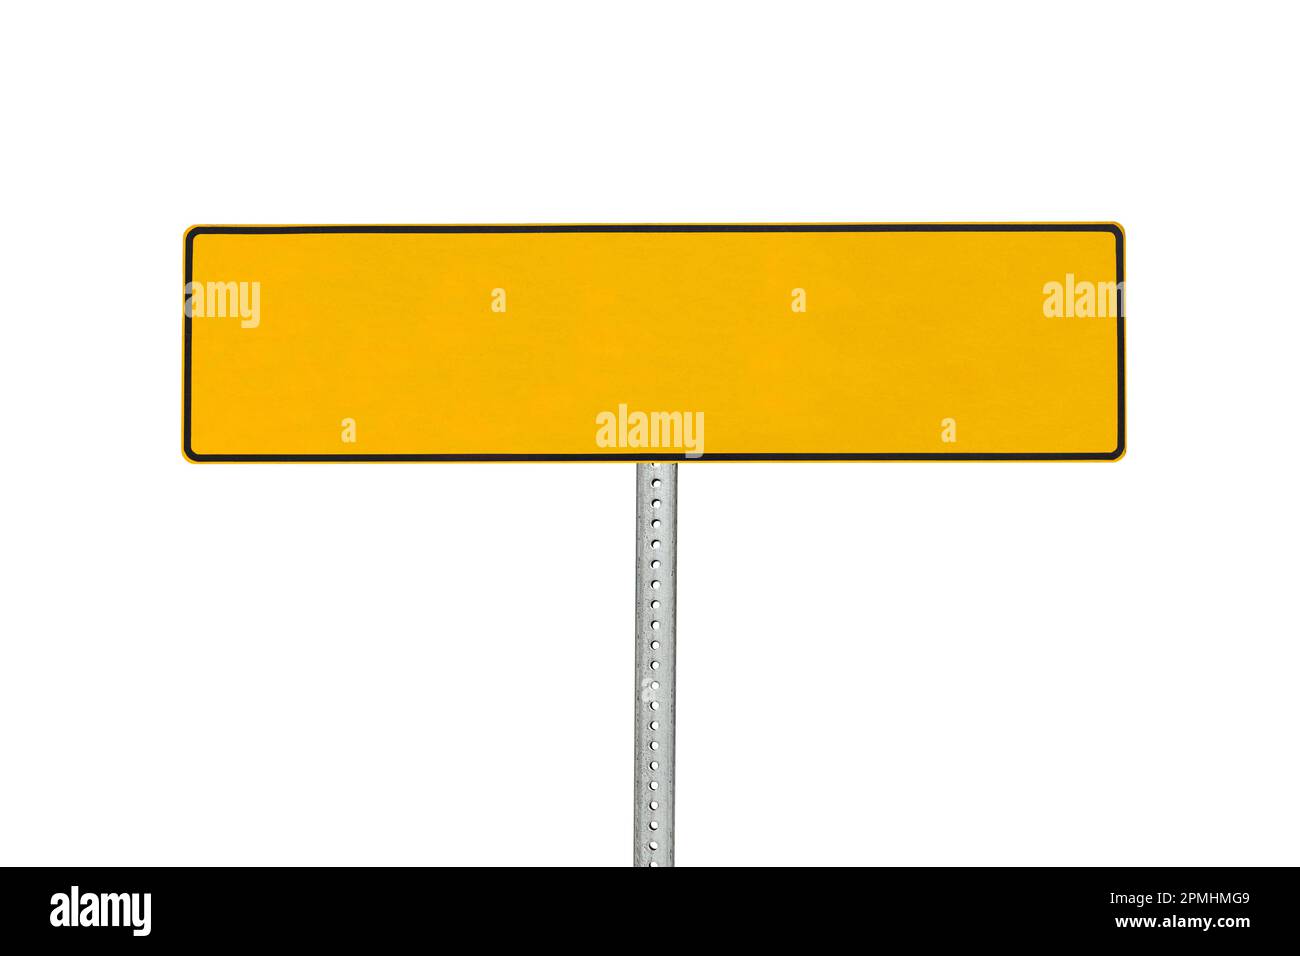 Blank yellow road sign isolated with cut out background. Stock Photo